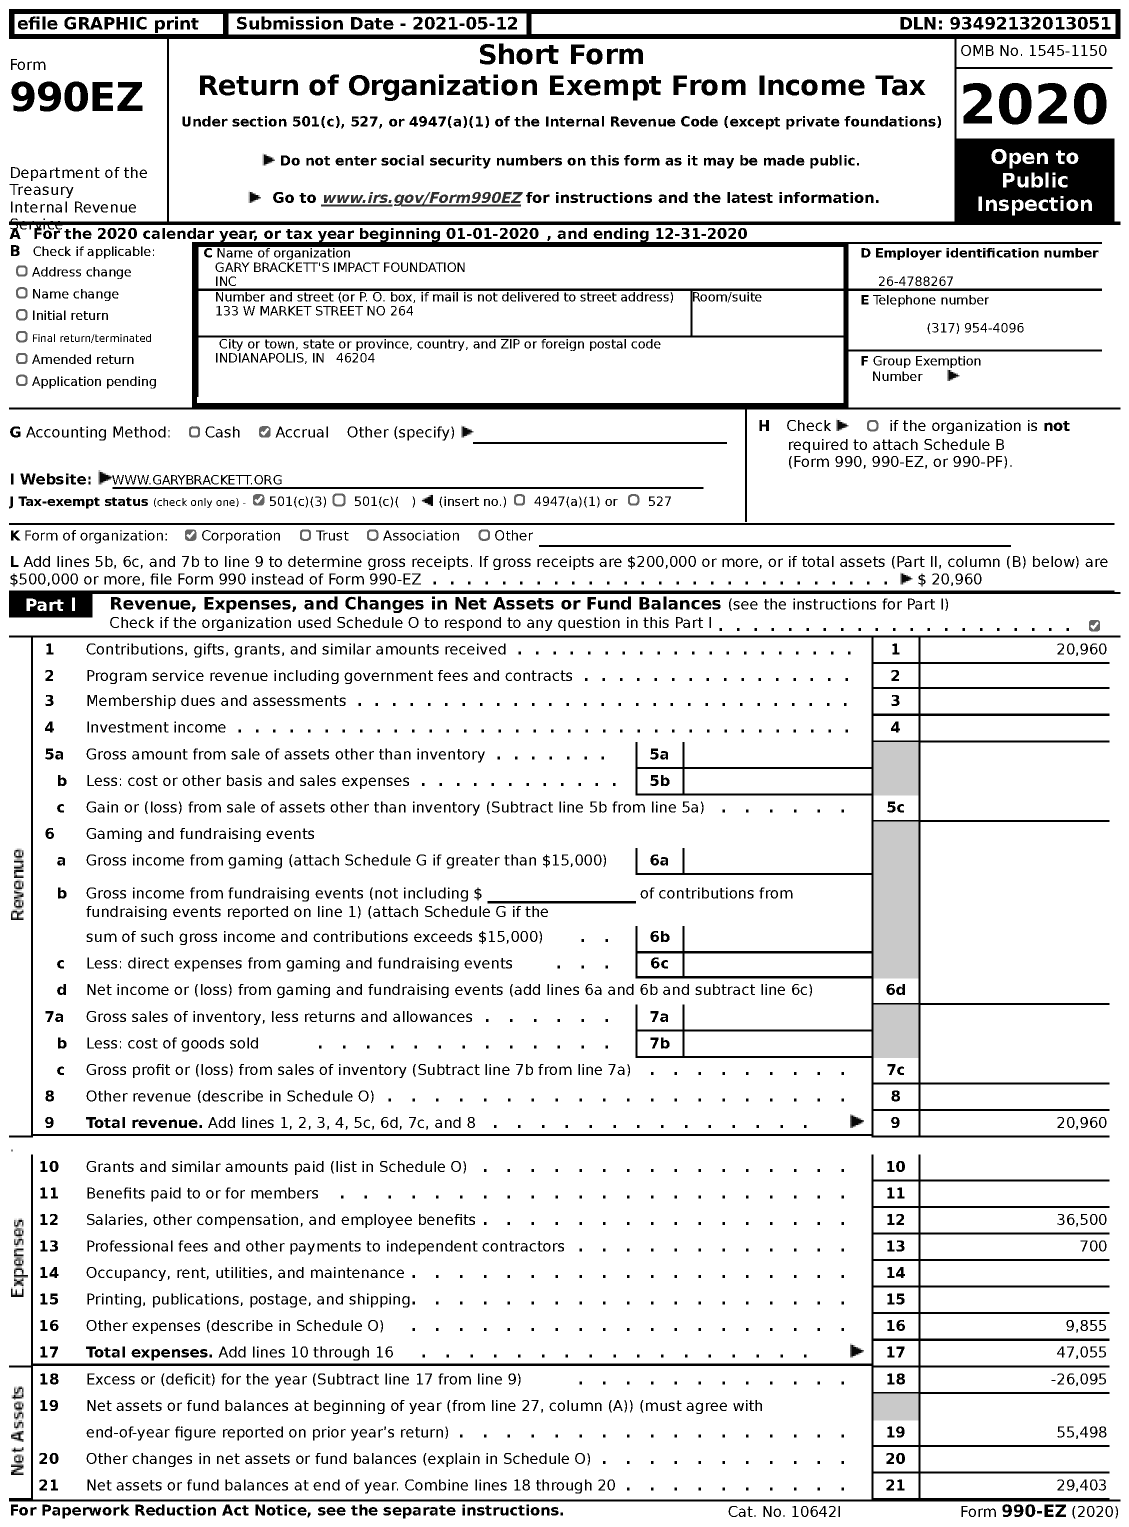 Image of first page of 2020 Form 990EZ for Gary Brackett's Impact Foundation